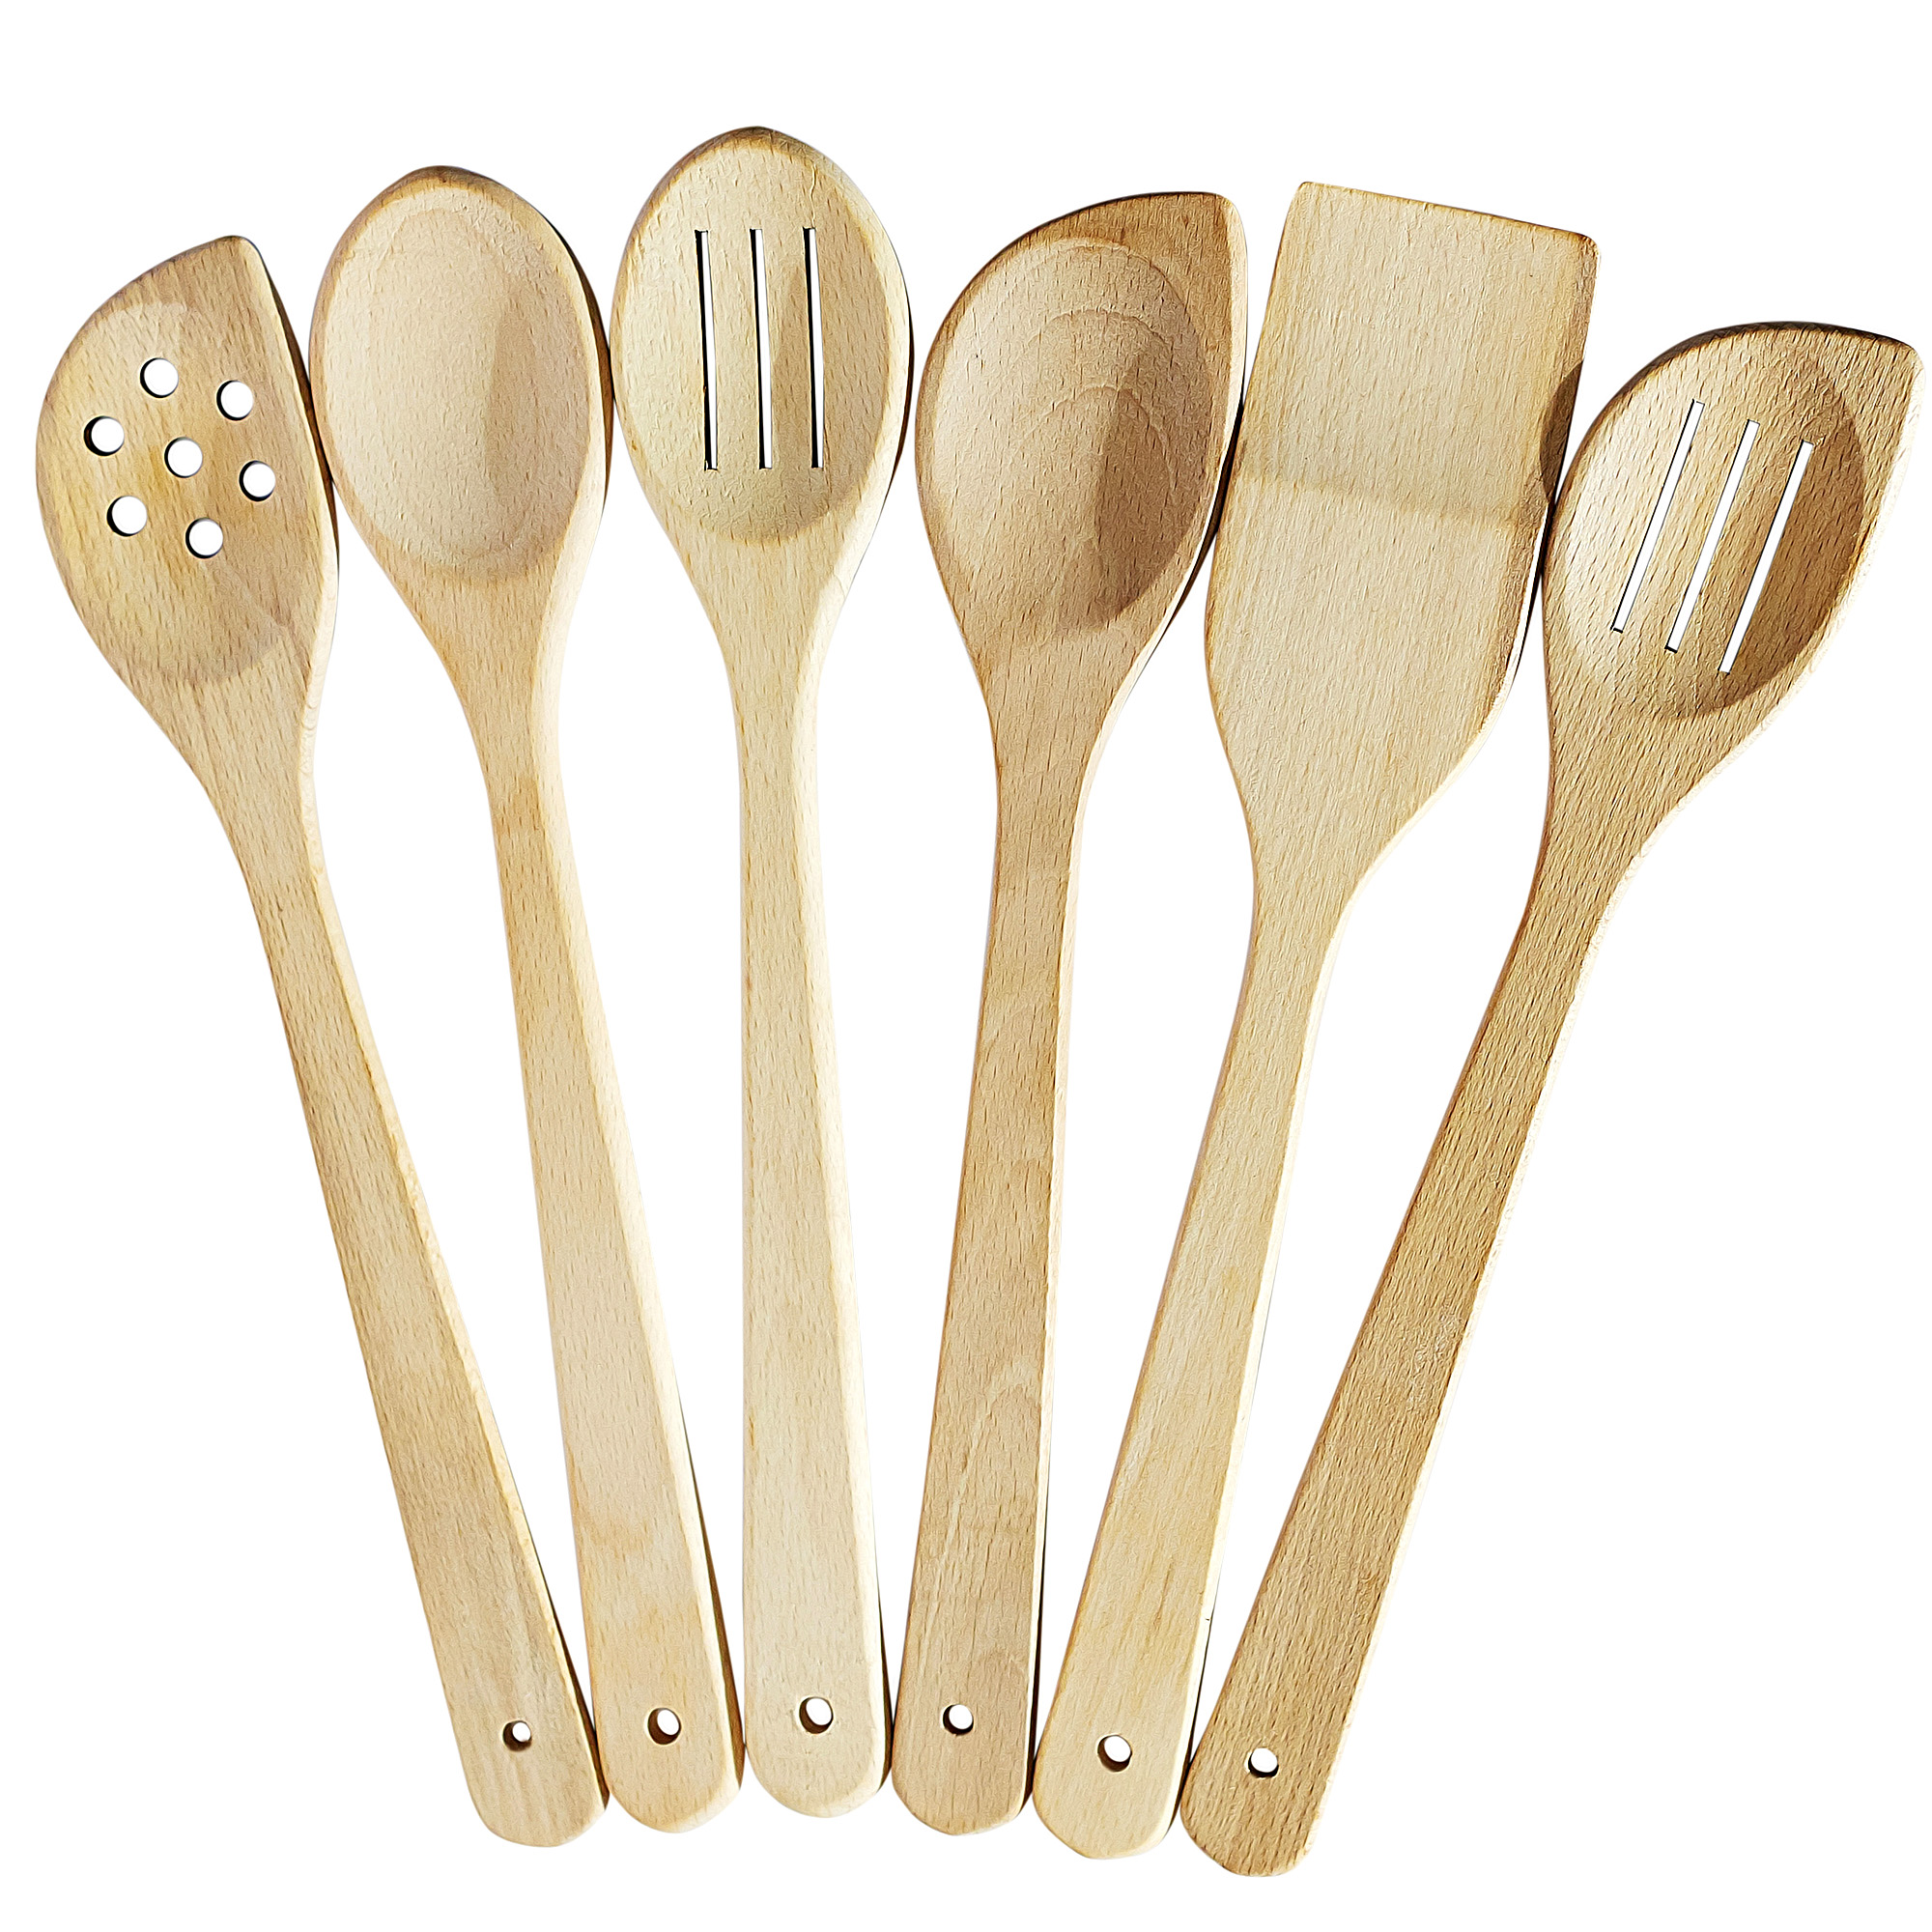 Wooden Spoons, Set of 6. – Ecosall